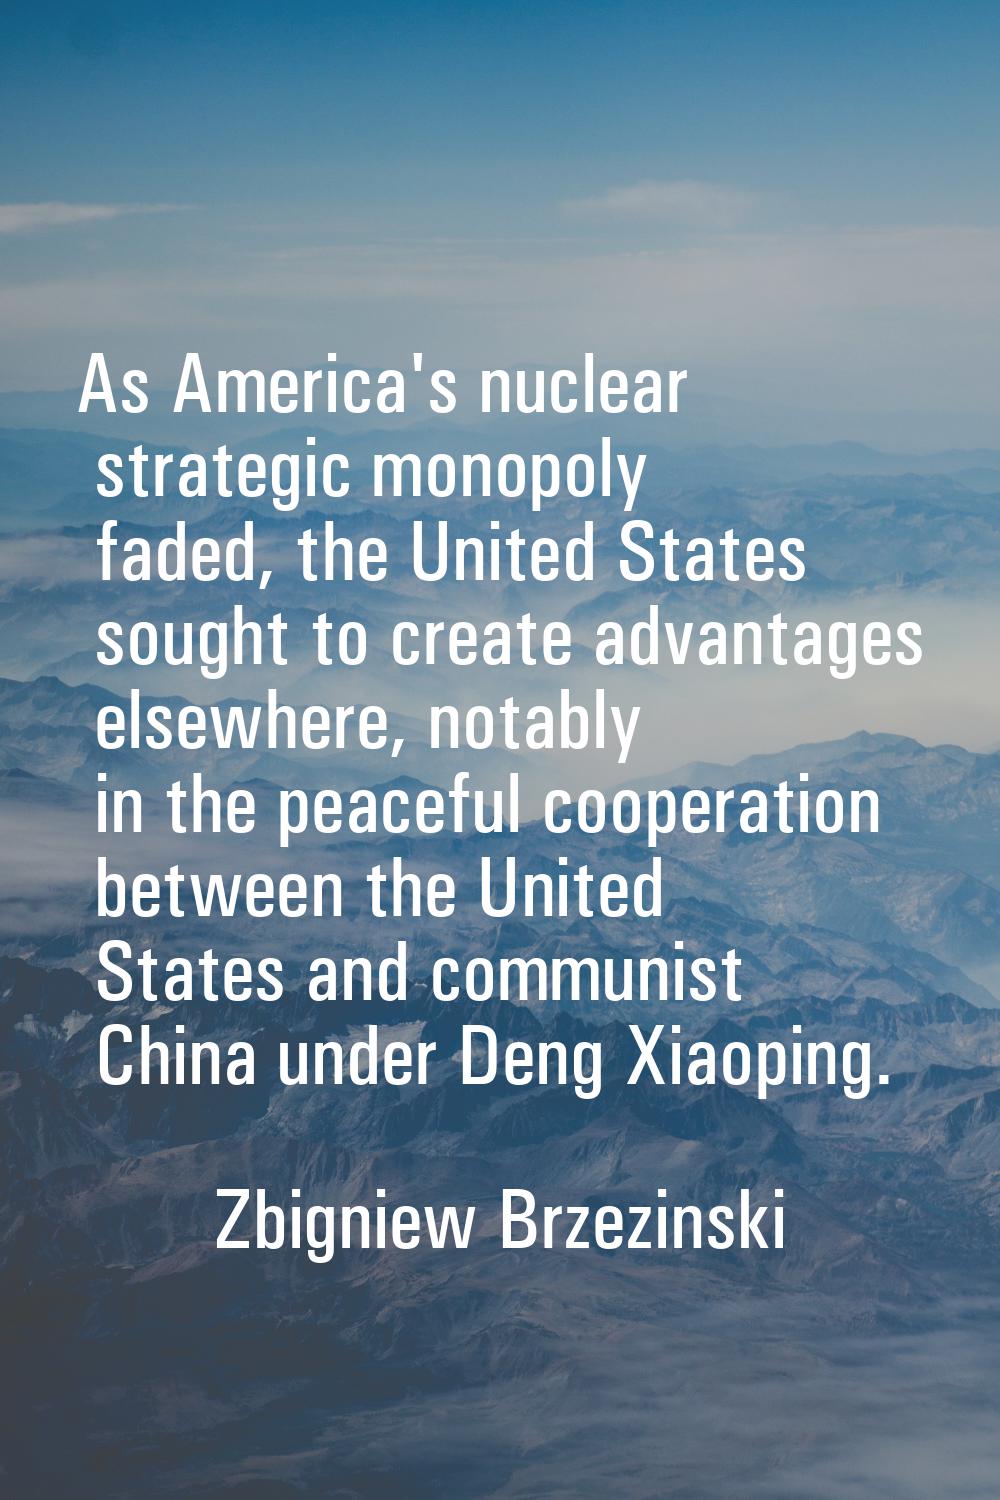 As America's nuclear strategic monopoly faded, the United States sought to create advantages elsewh